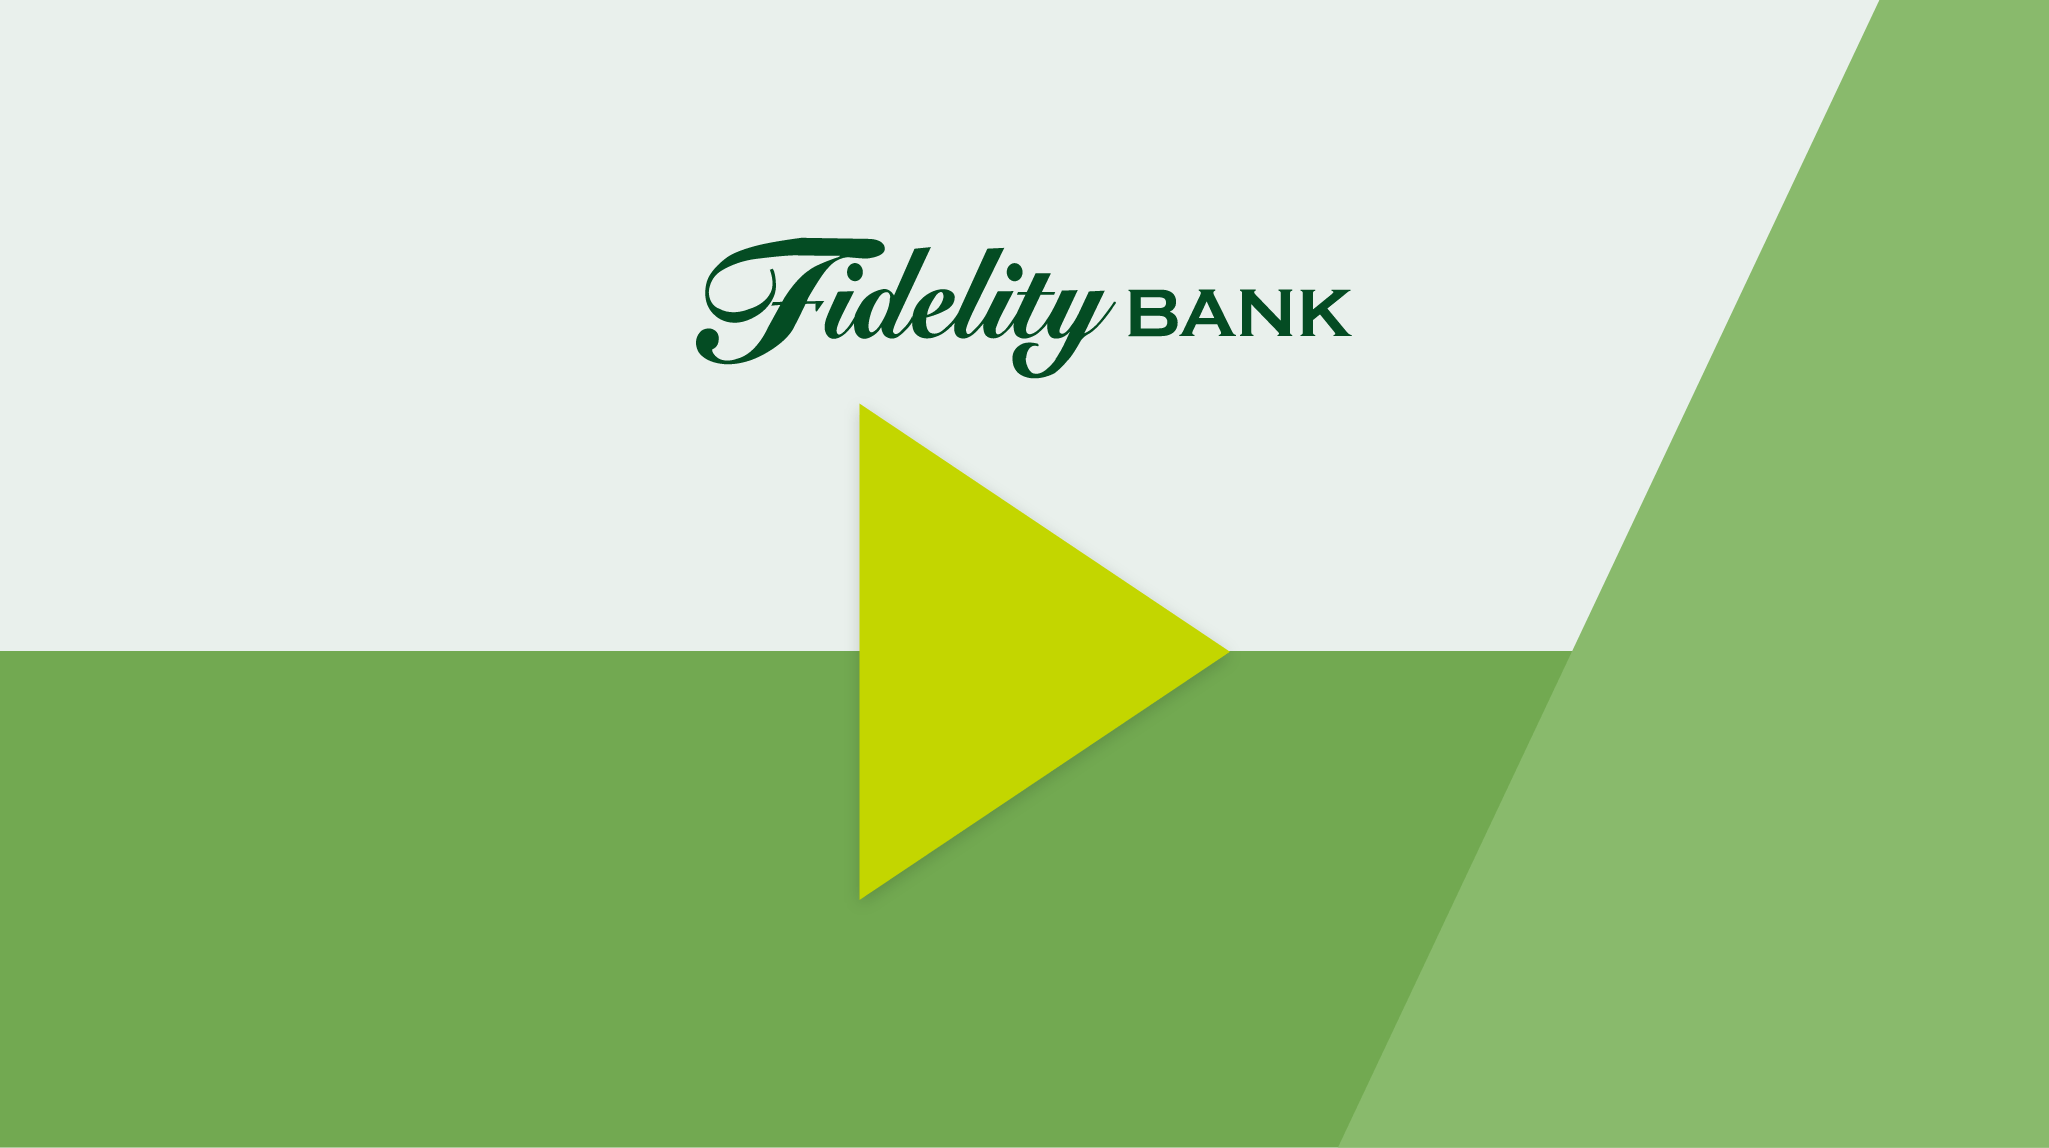 Visit Fidelity Bank's branch in Dunmore, PA.